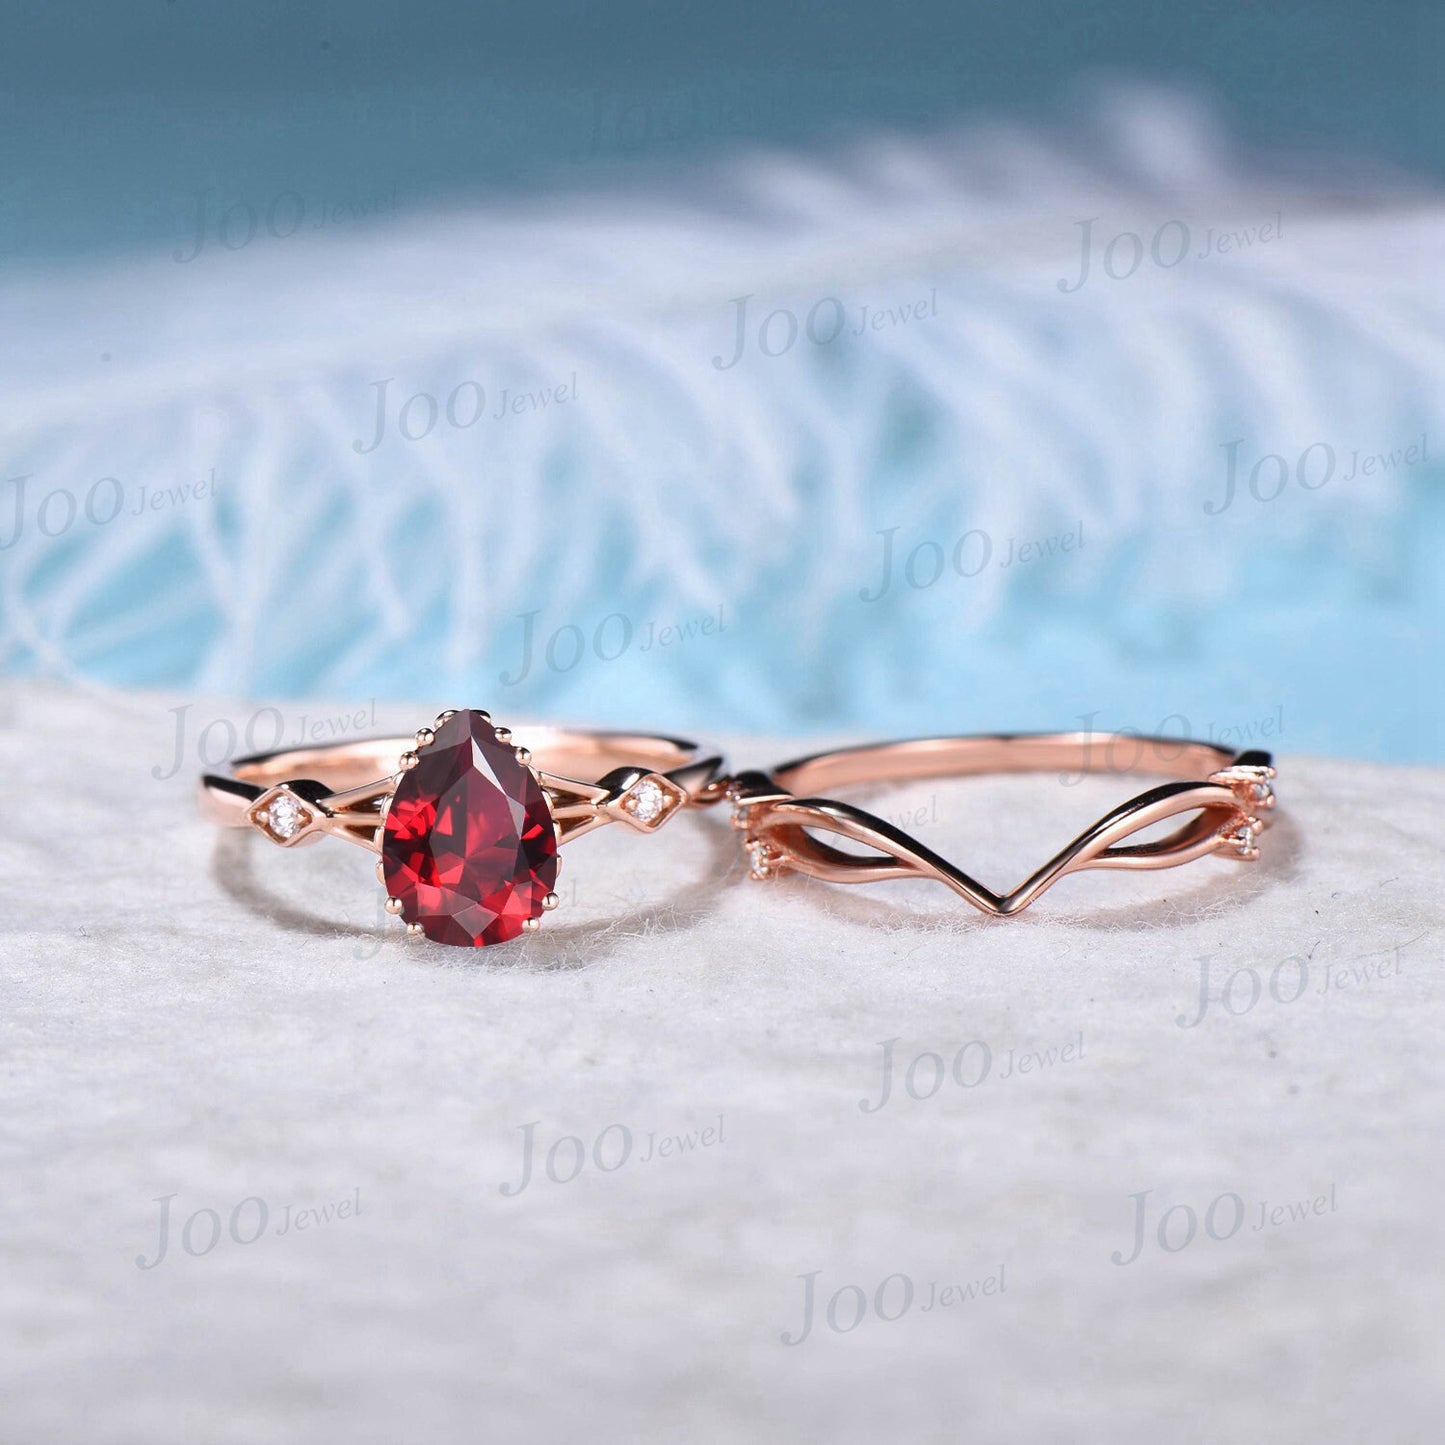 1.25ct Pear Shaped Ruby Gemstone Jewelry 10K Rose Gold Twig Vine Red Ruby Engagement Ring Set Vintage Anniversary Ring July Birthstone Gift